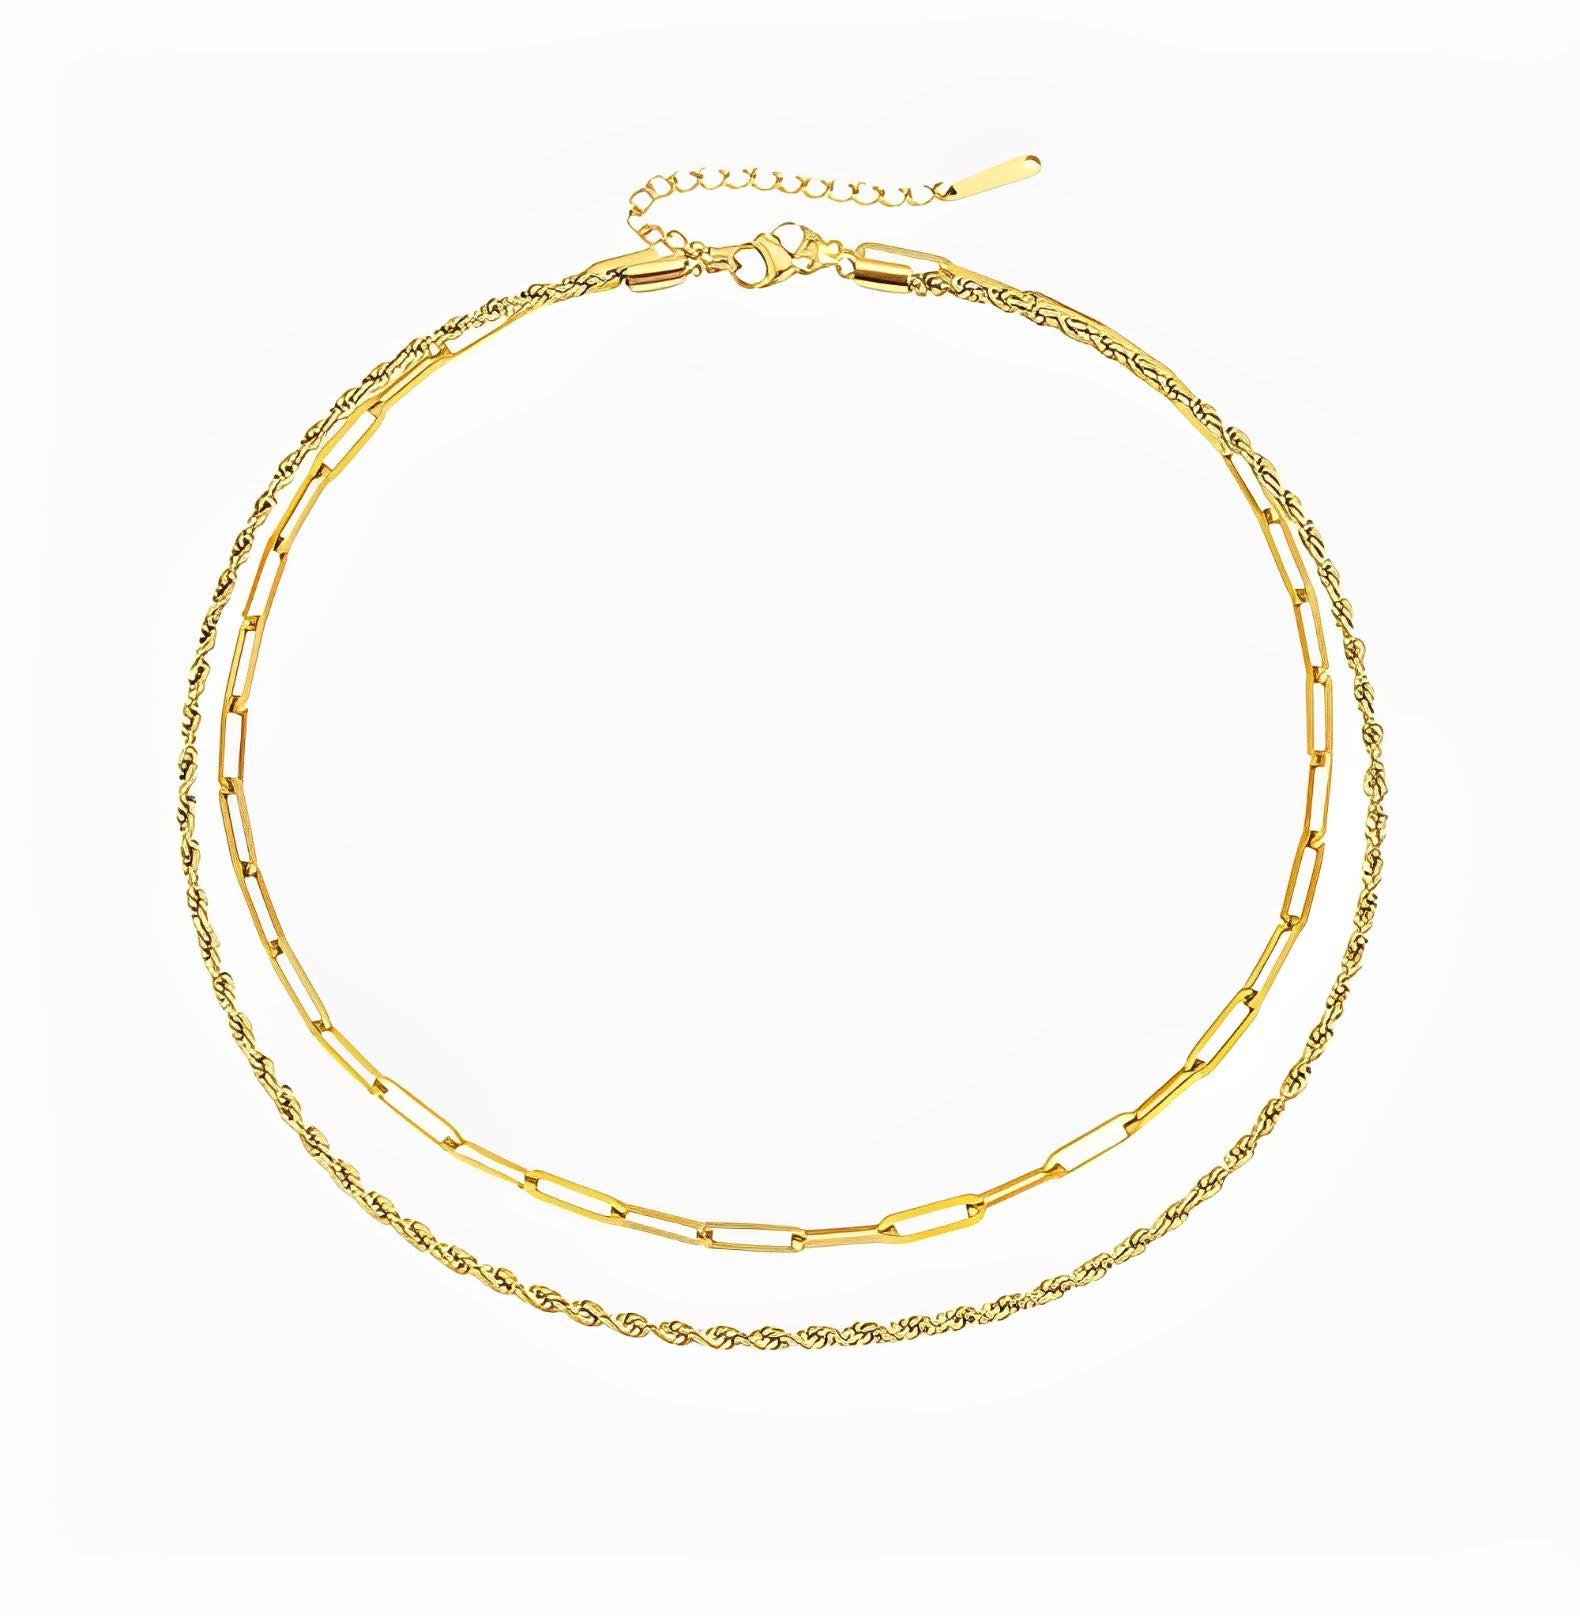 BOHEMIAN DOUBLE LAYER CHAIN NECKLACE braclet Yubama Jewelry Online Store - The Elegant Designs of Gold and Silver ! 